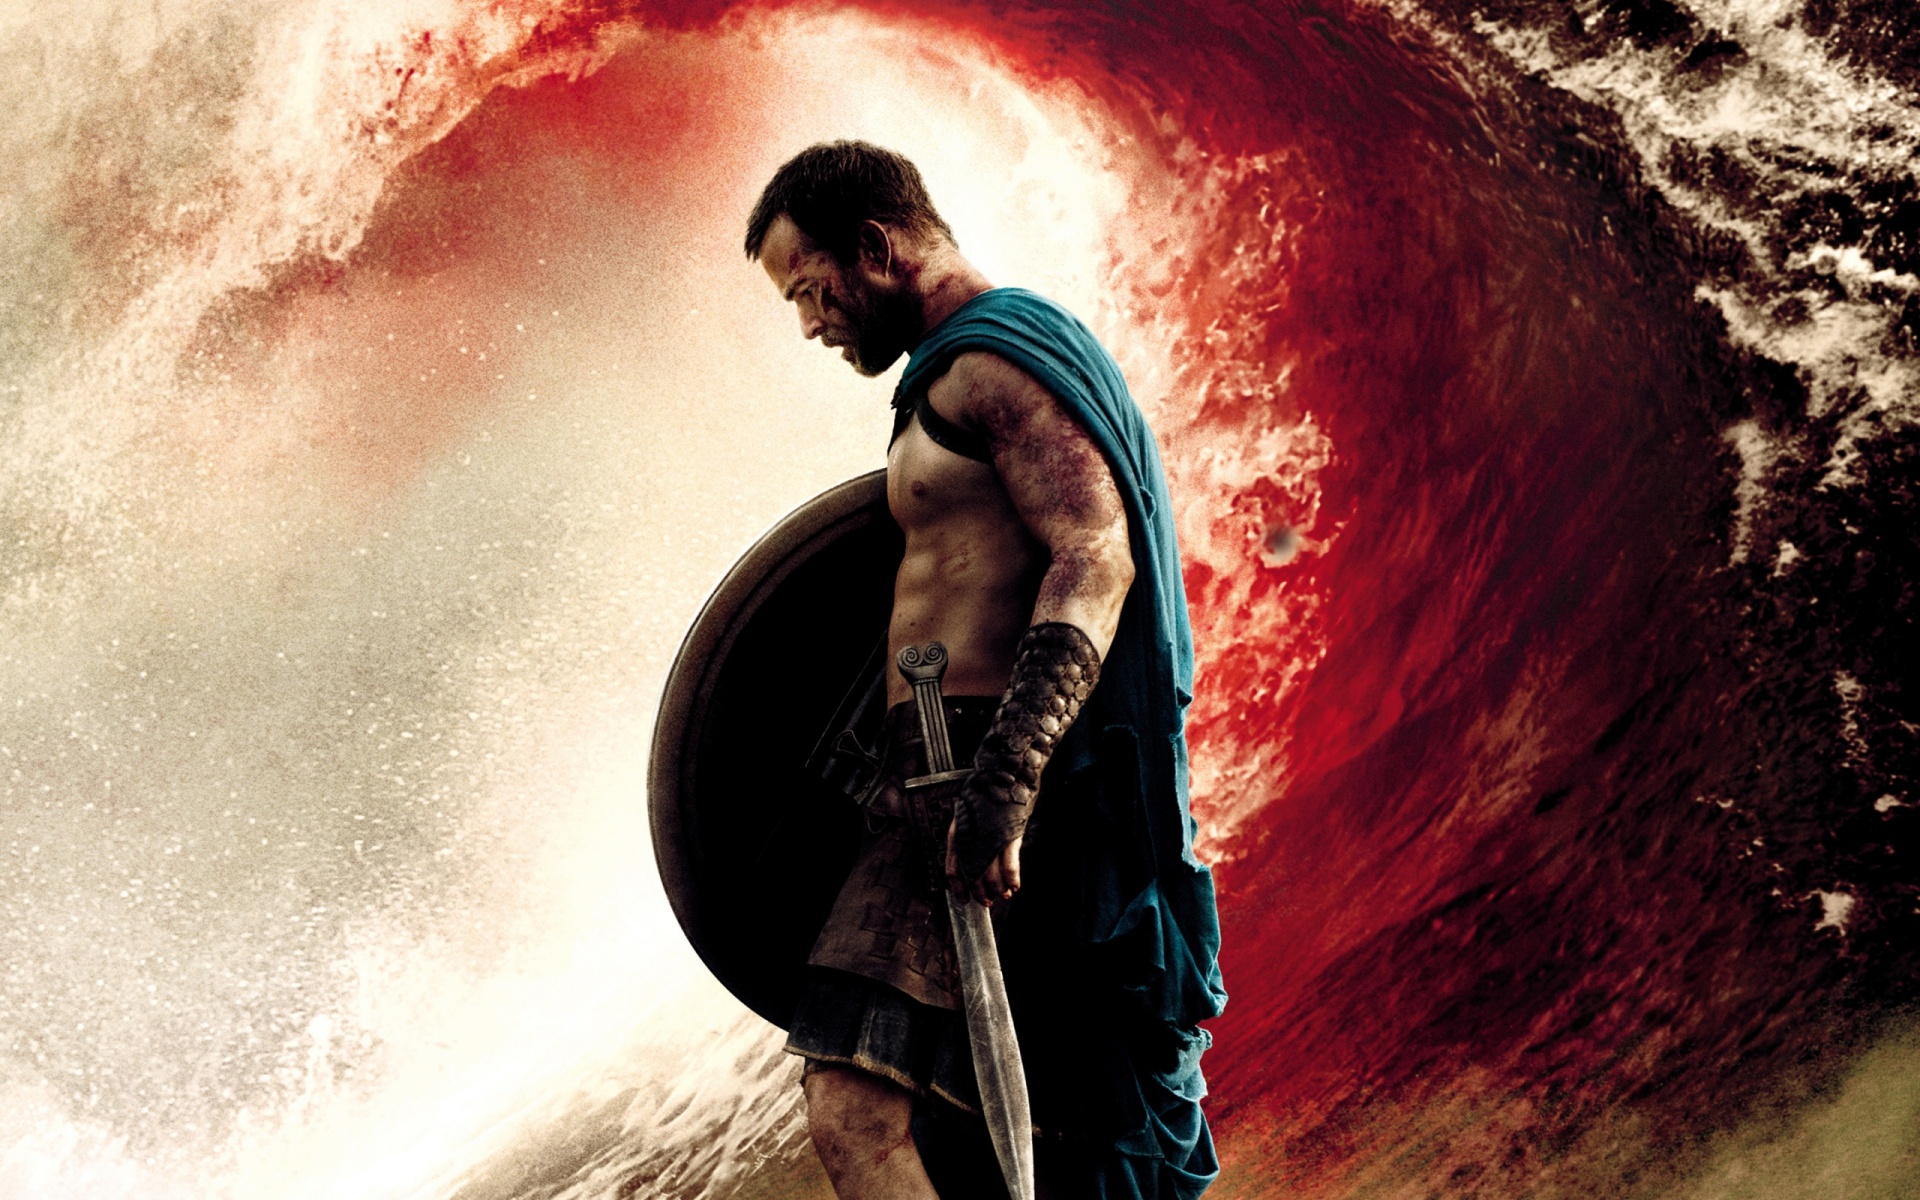 300 Rise Of An Empire 2014